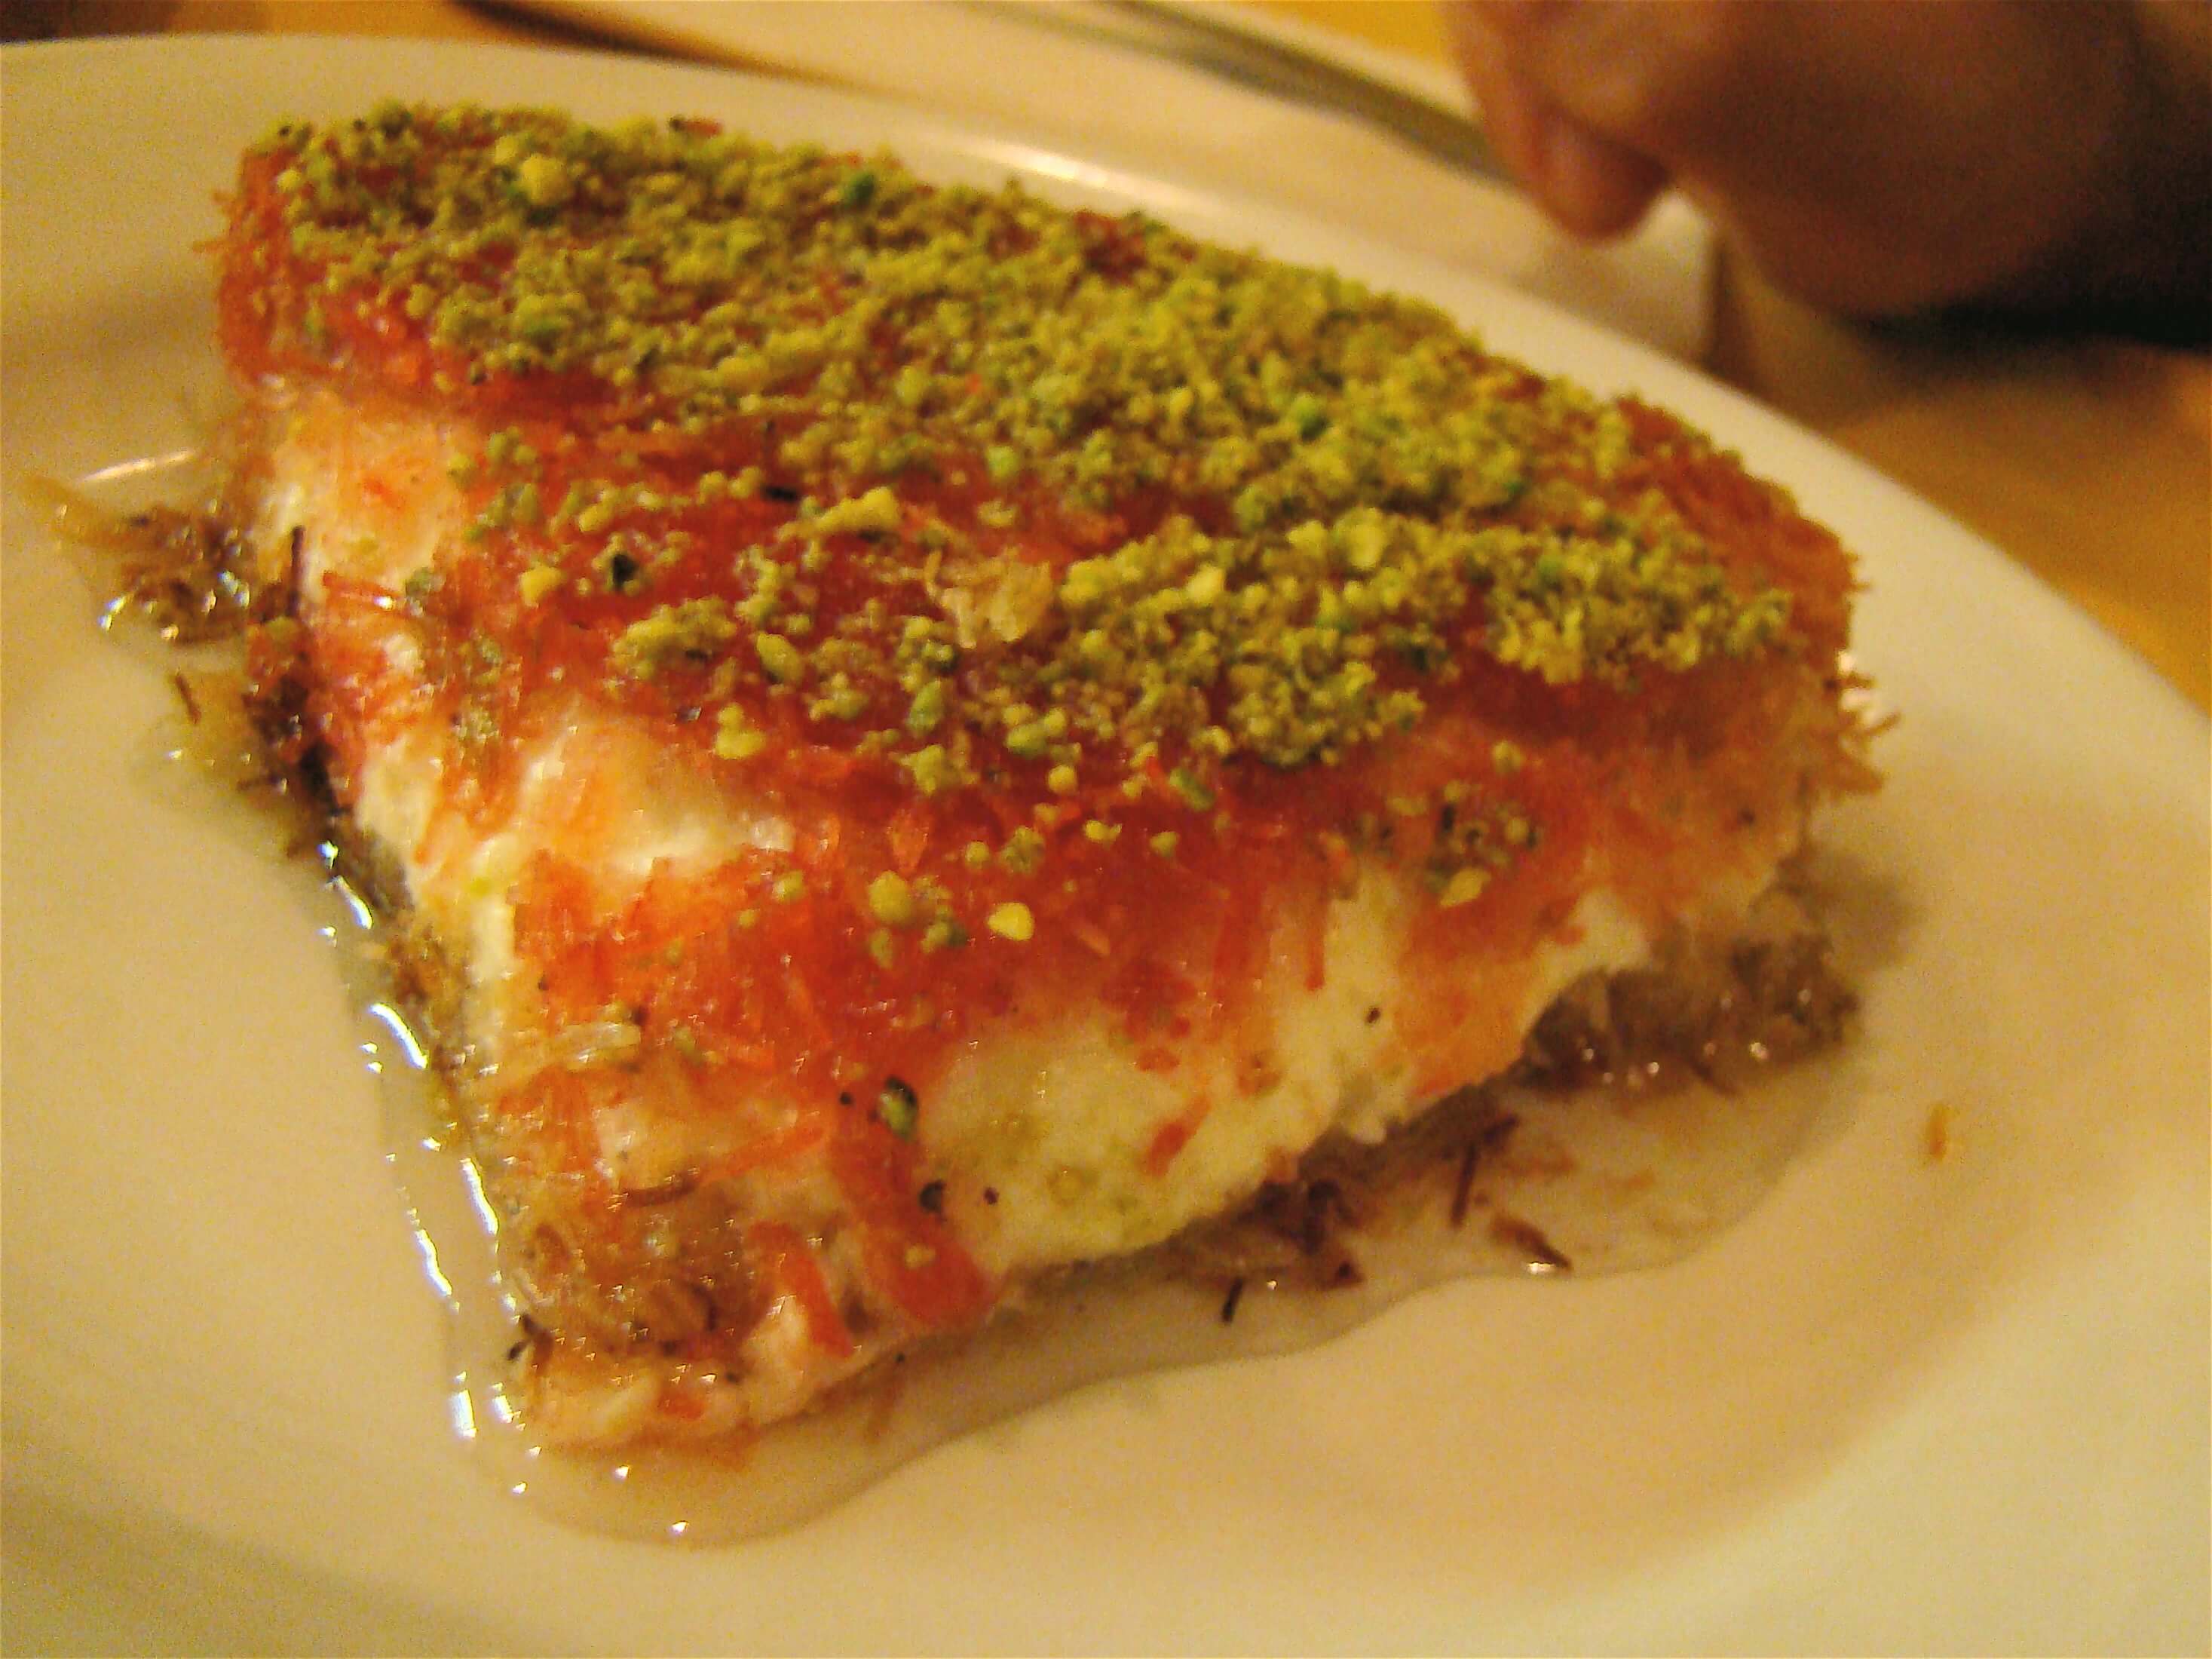 Sweets Please, A Quick Look to Arabic Desserts